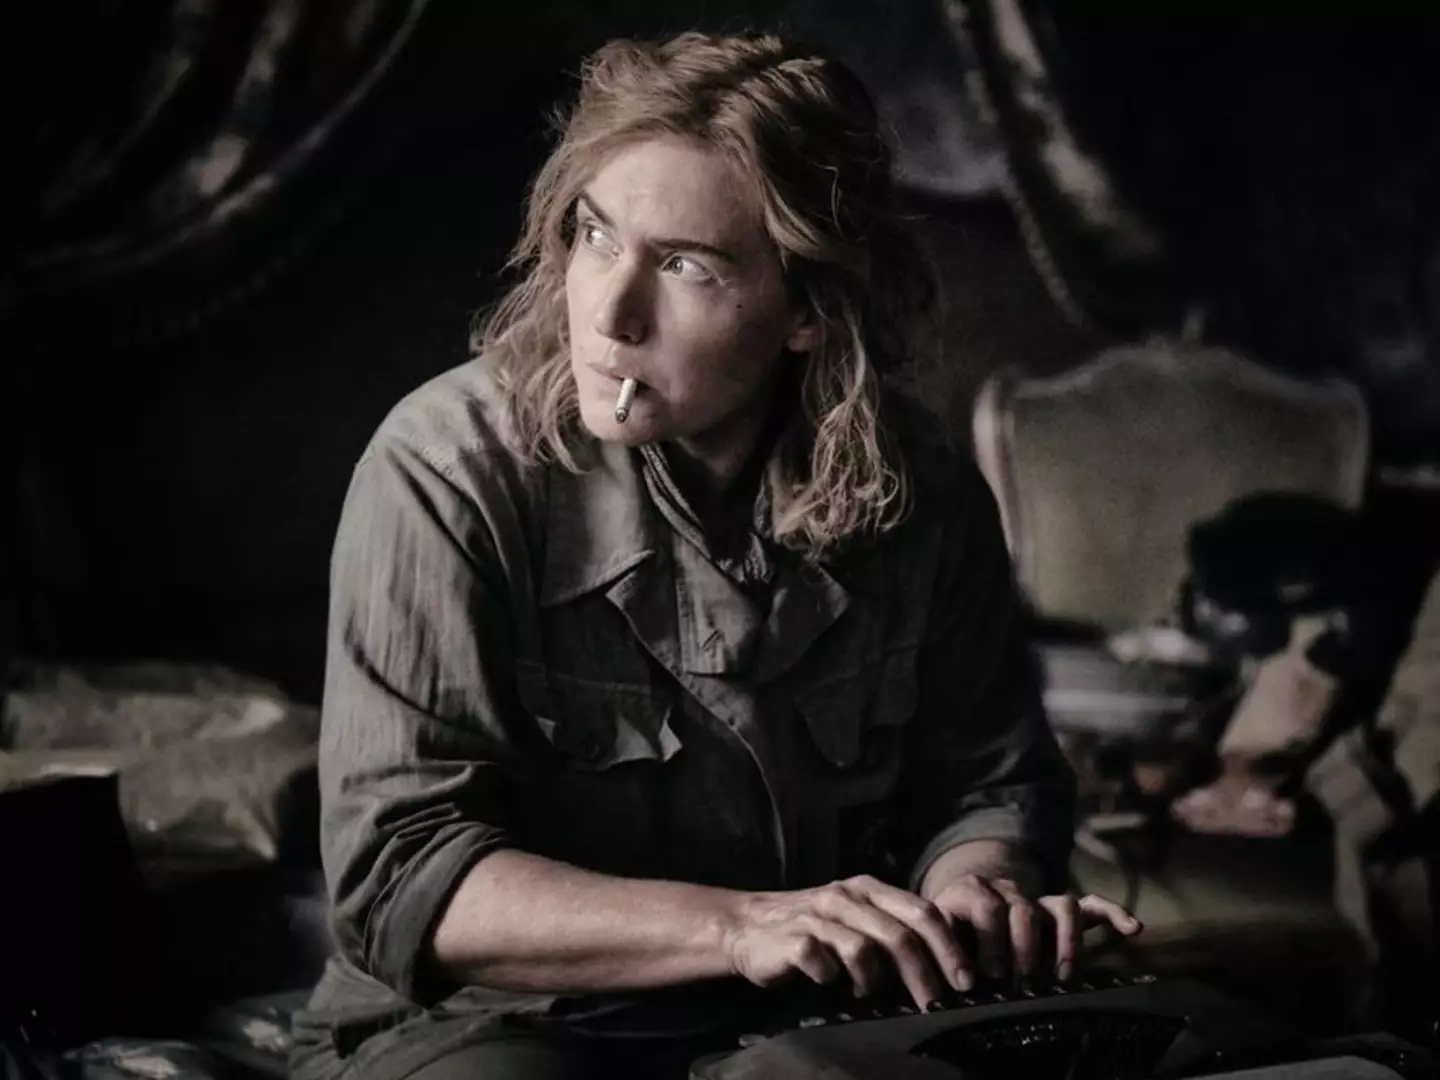 Winslet stars as Lee Miller in the British biographical drama film.